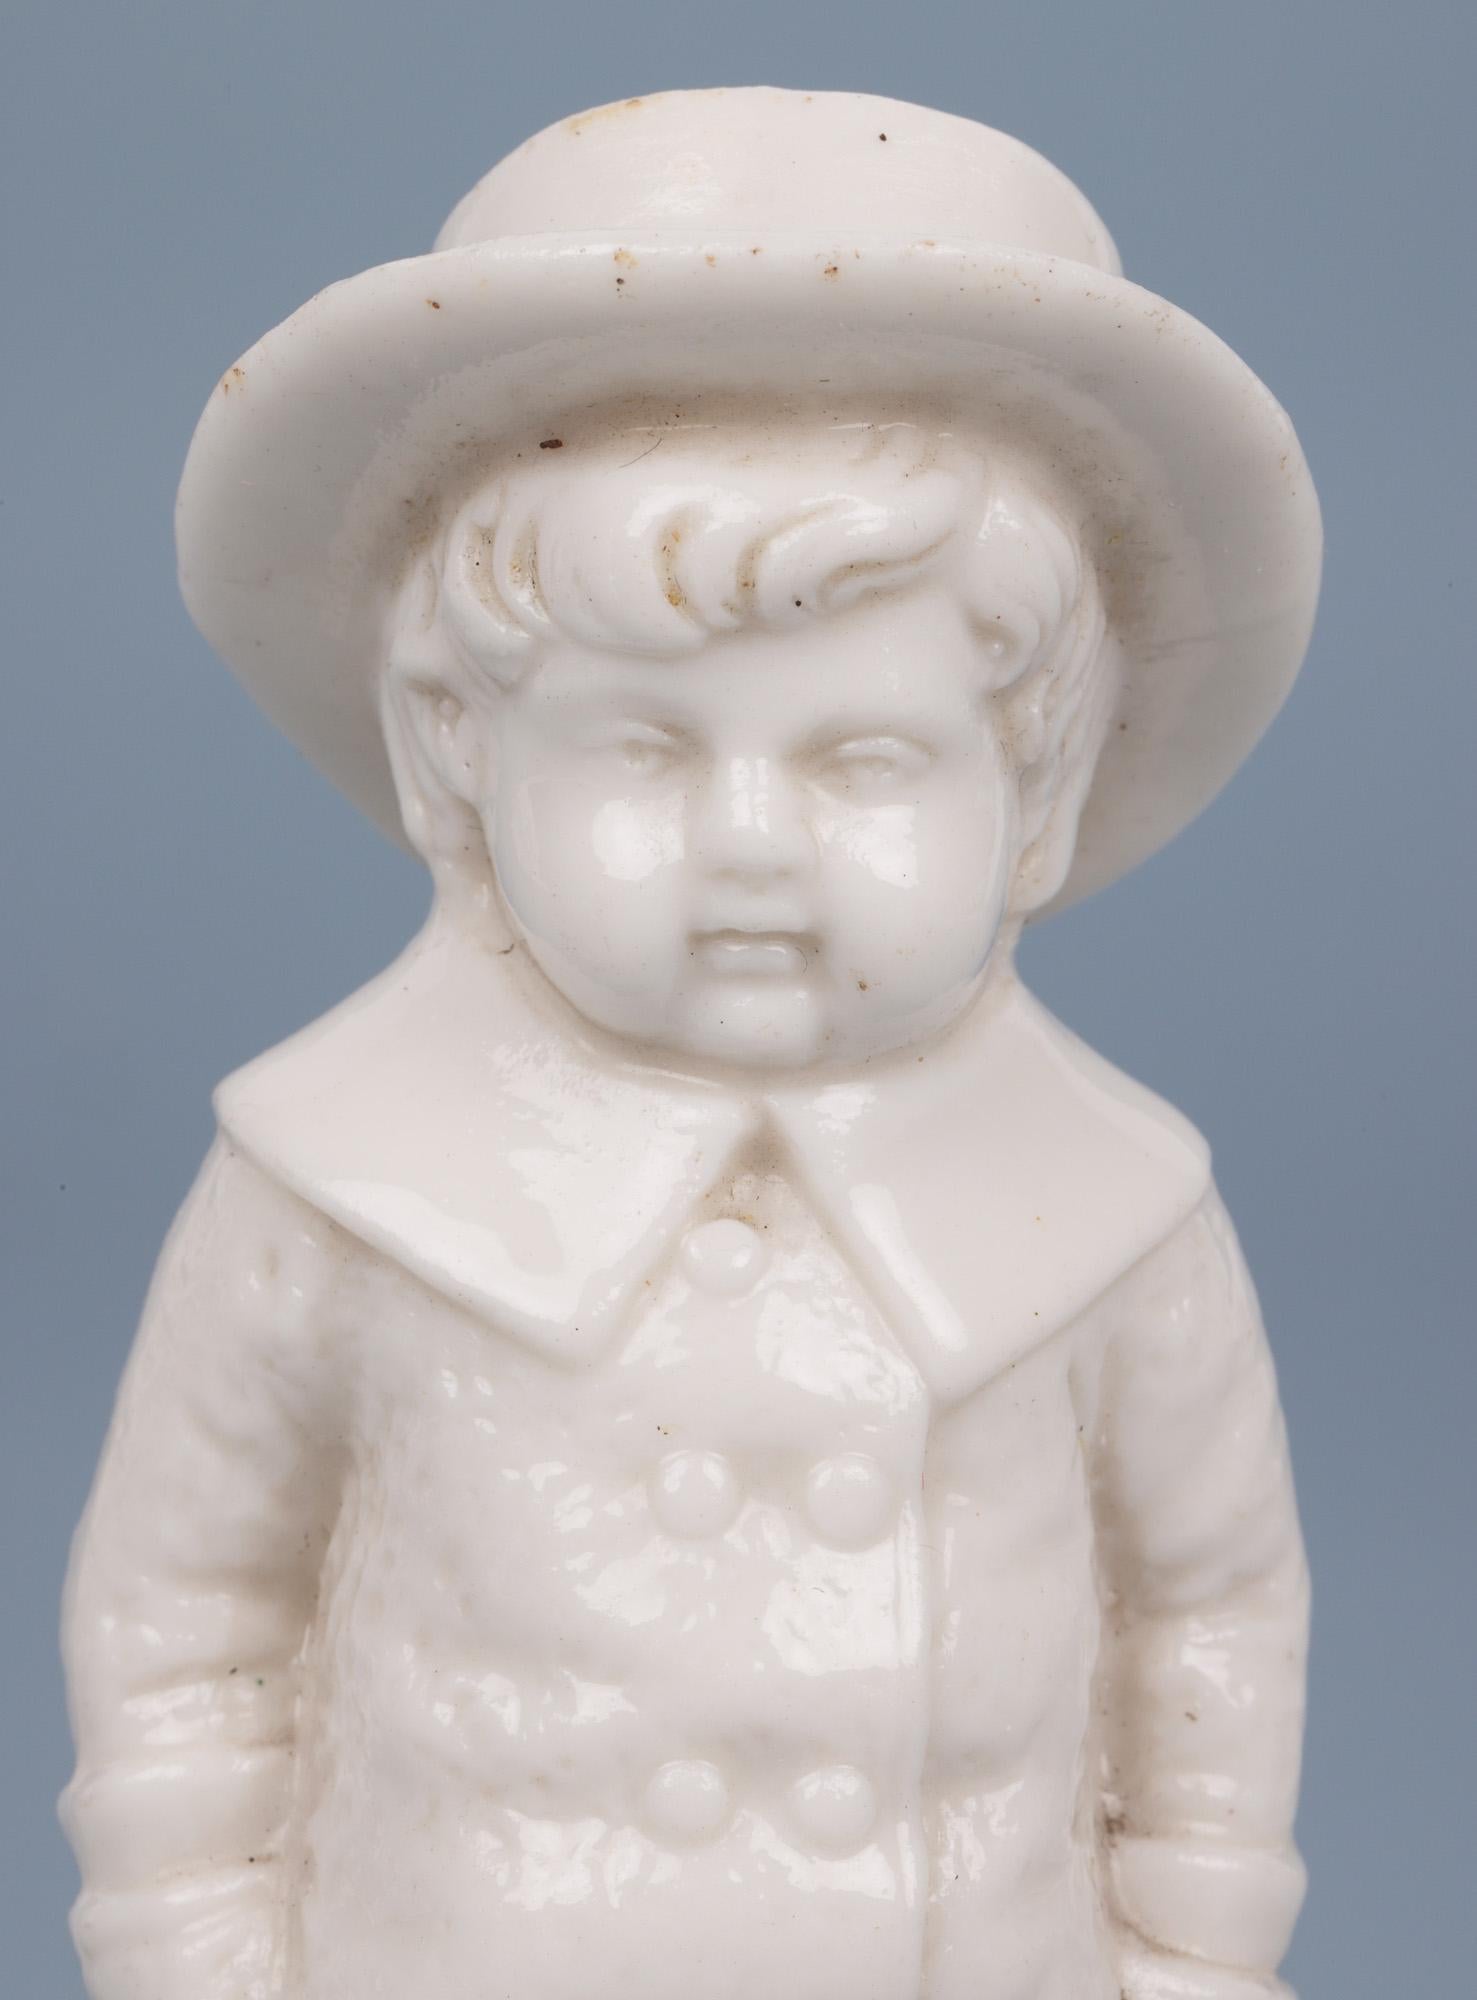 A delightful antique English porcelain pounce or pepper pot modelled as a young boy wearing a full length coat and hat dating from the 19th century. This quality pot is very lightly made reminiscent of the quality of Royal Worcester or similar and